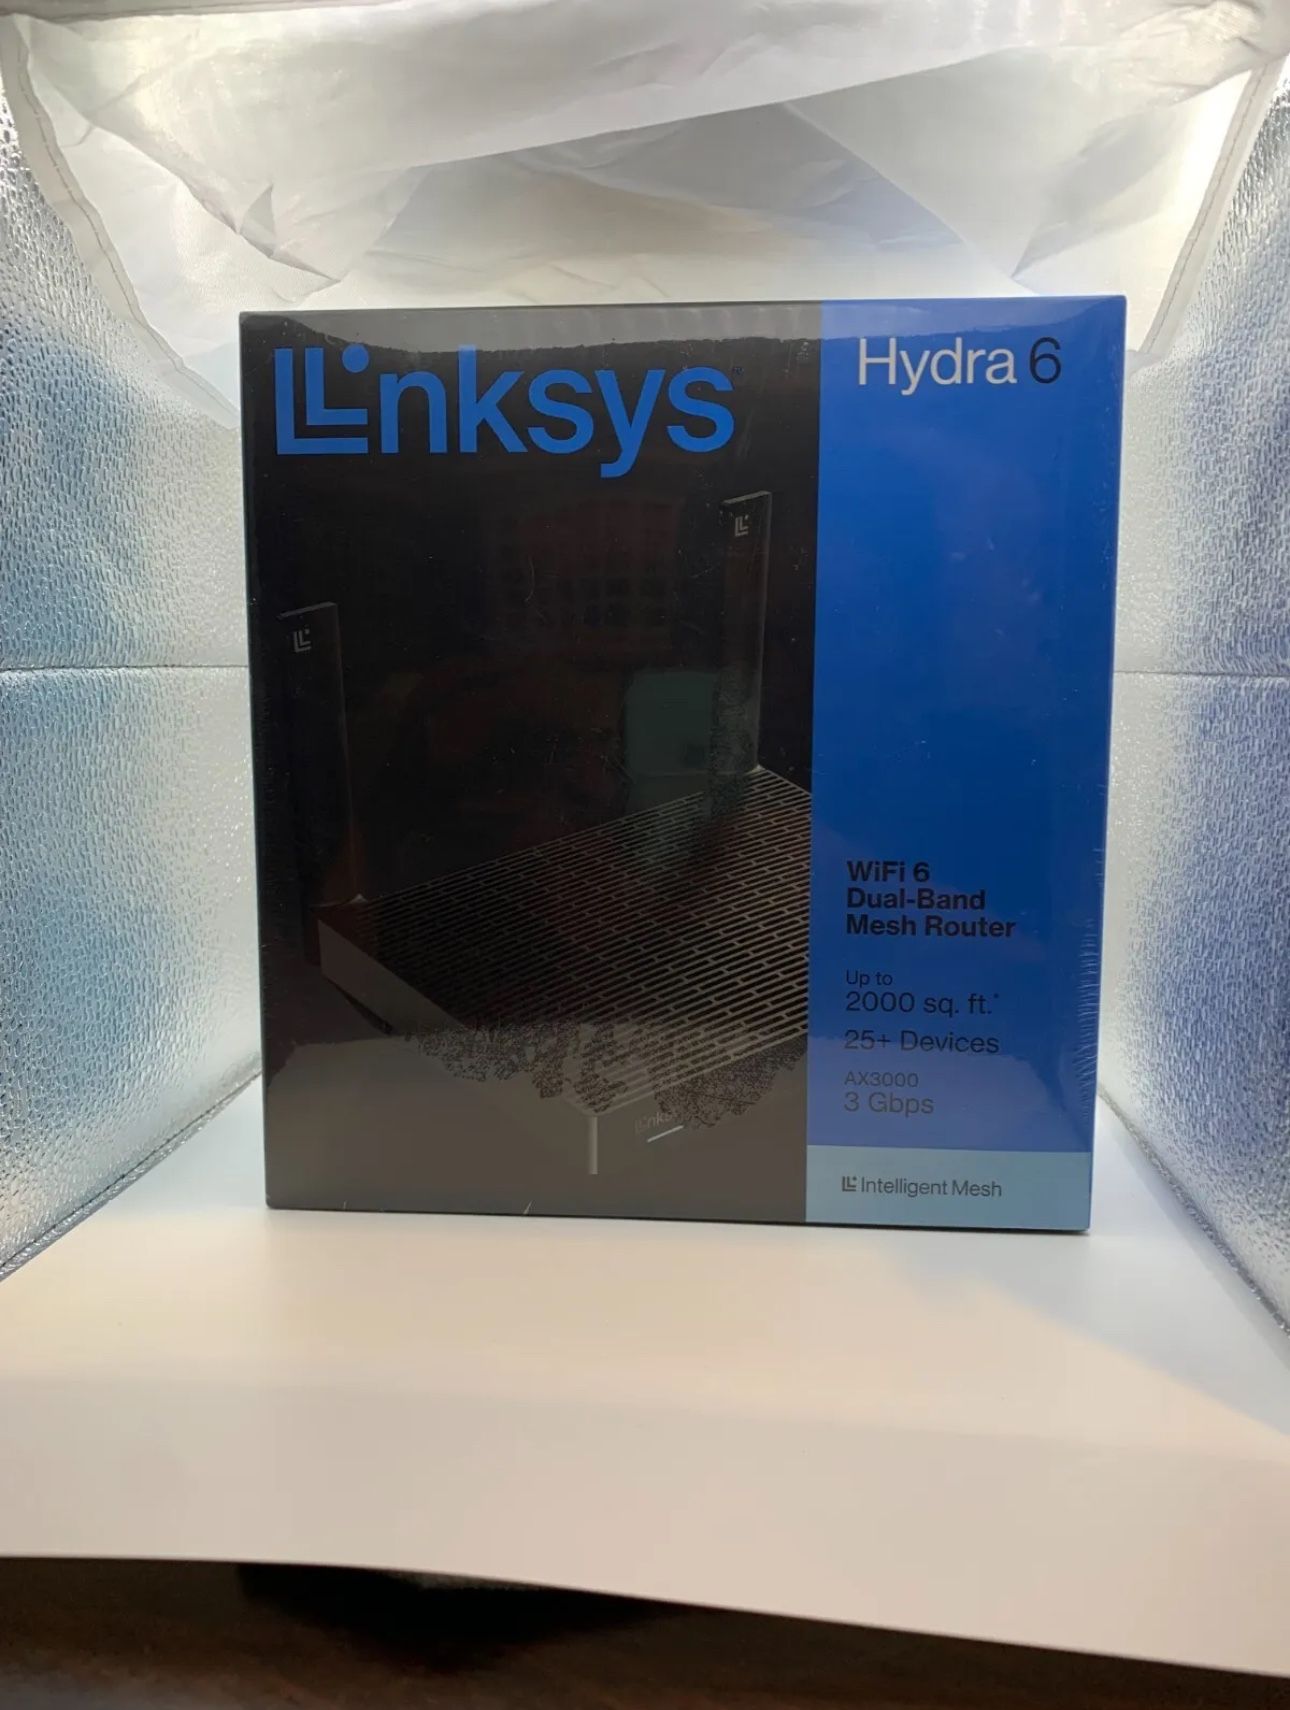 Linksys Router Hydra 6 - WiFi 6 router 